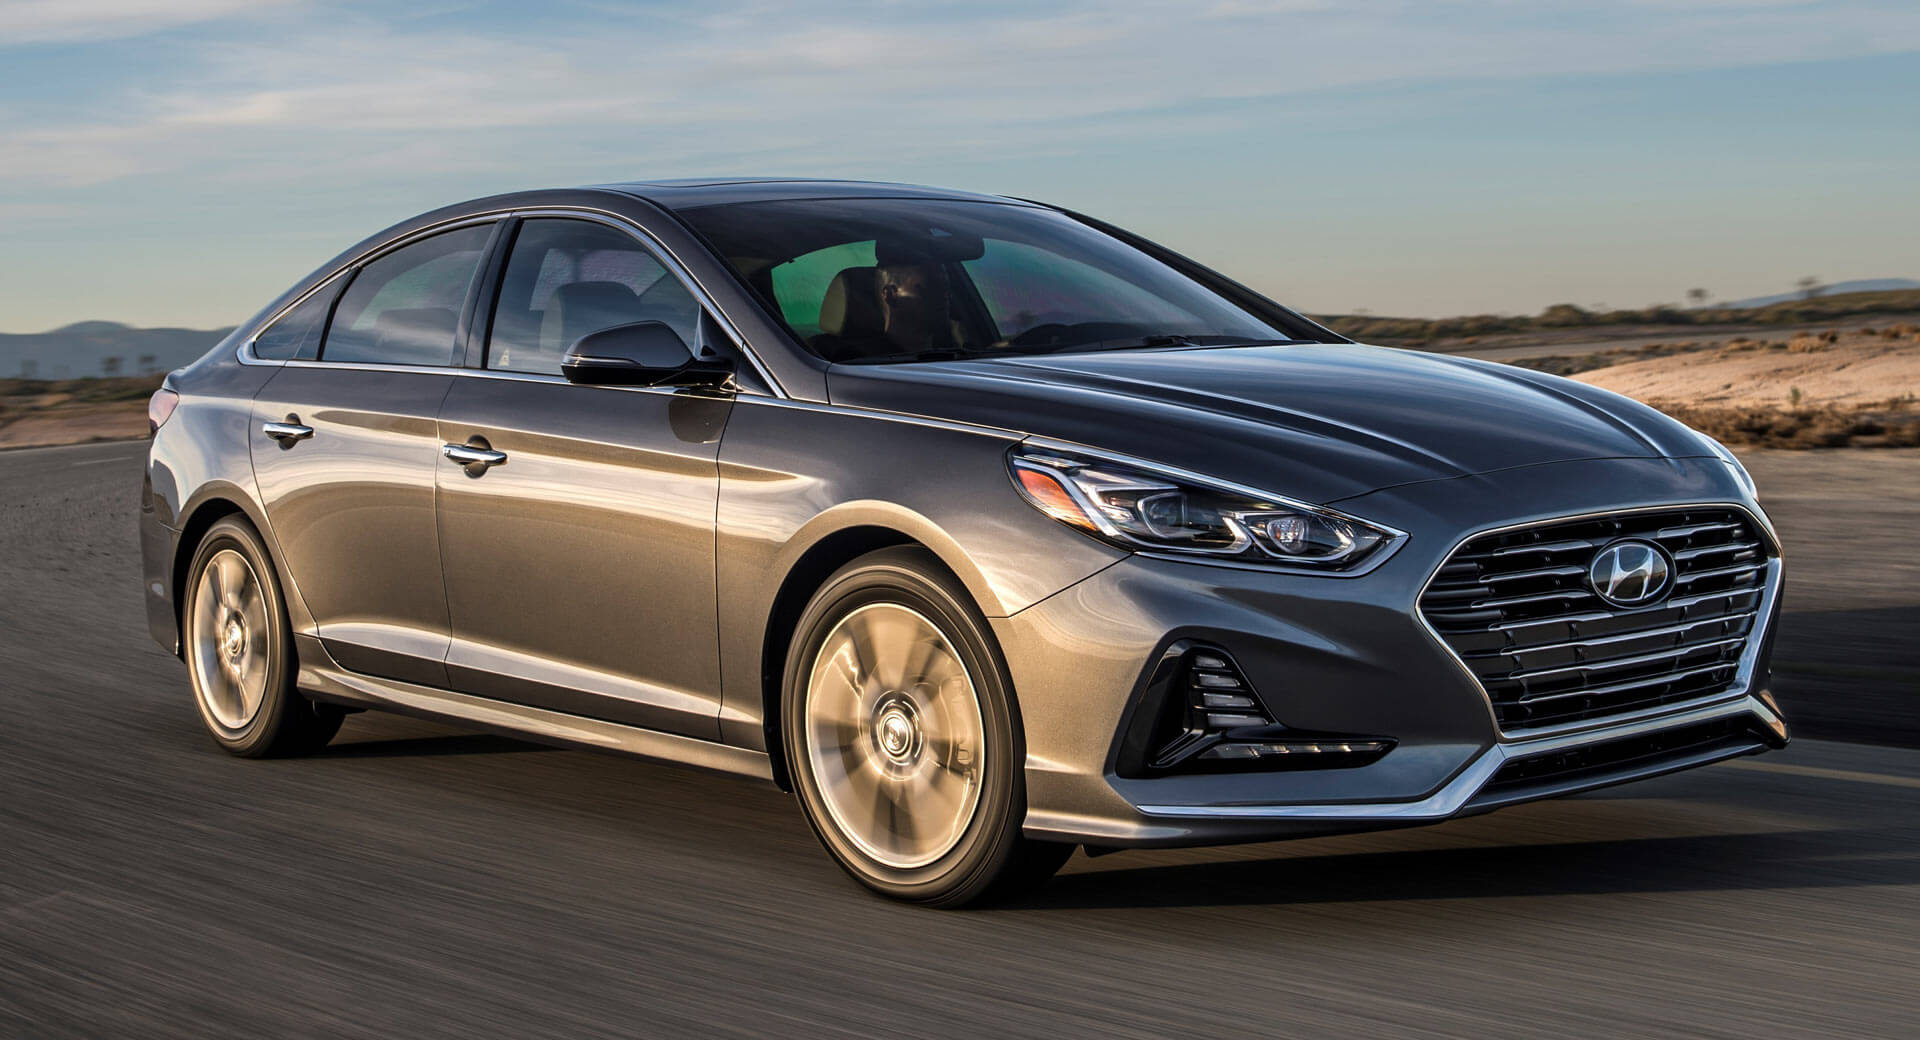 Facelifted 2018 Hyundai Sonata Hybrid To Bow In Chicago | Carscoops